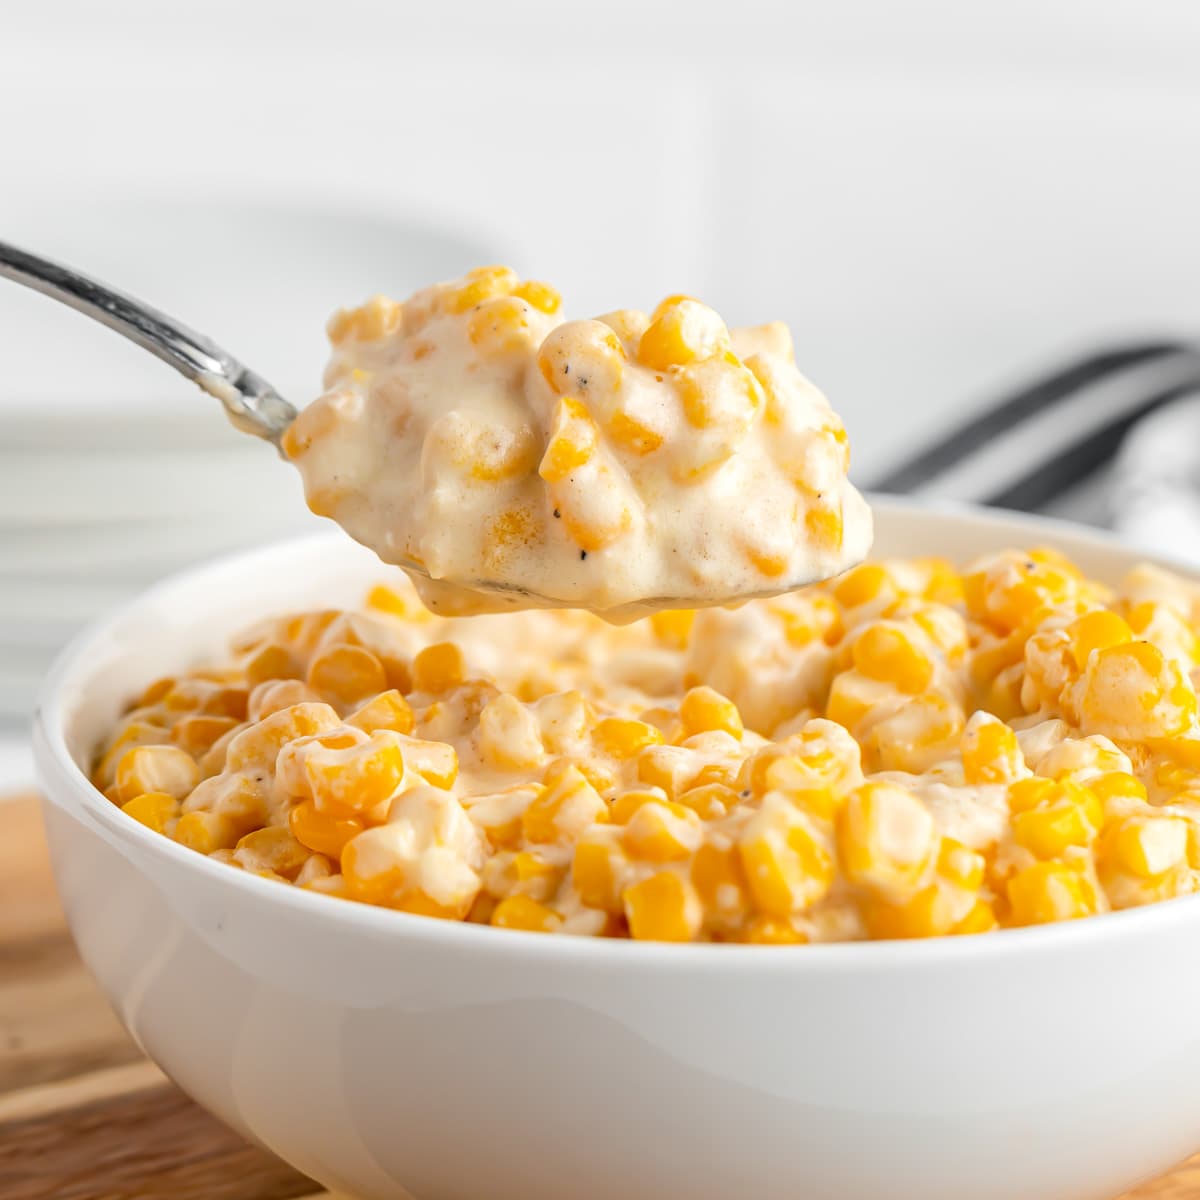 A spoon full of slow cooker creamed corn from a bowl.